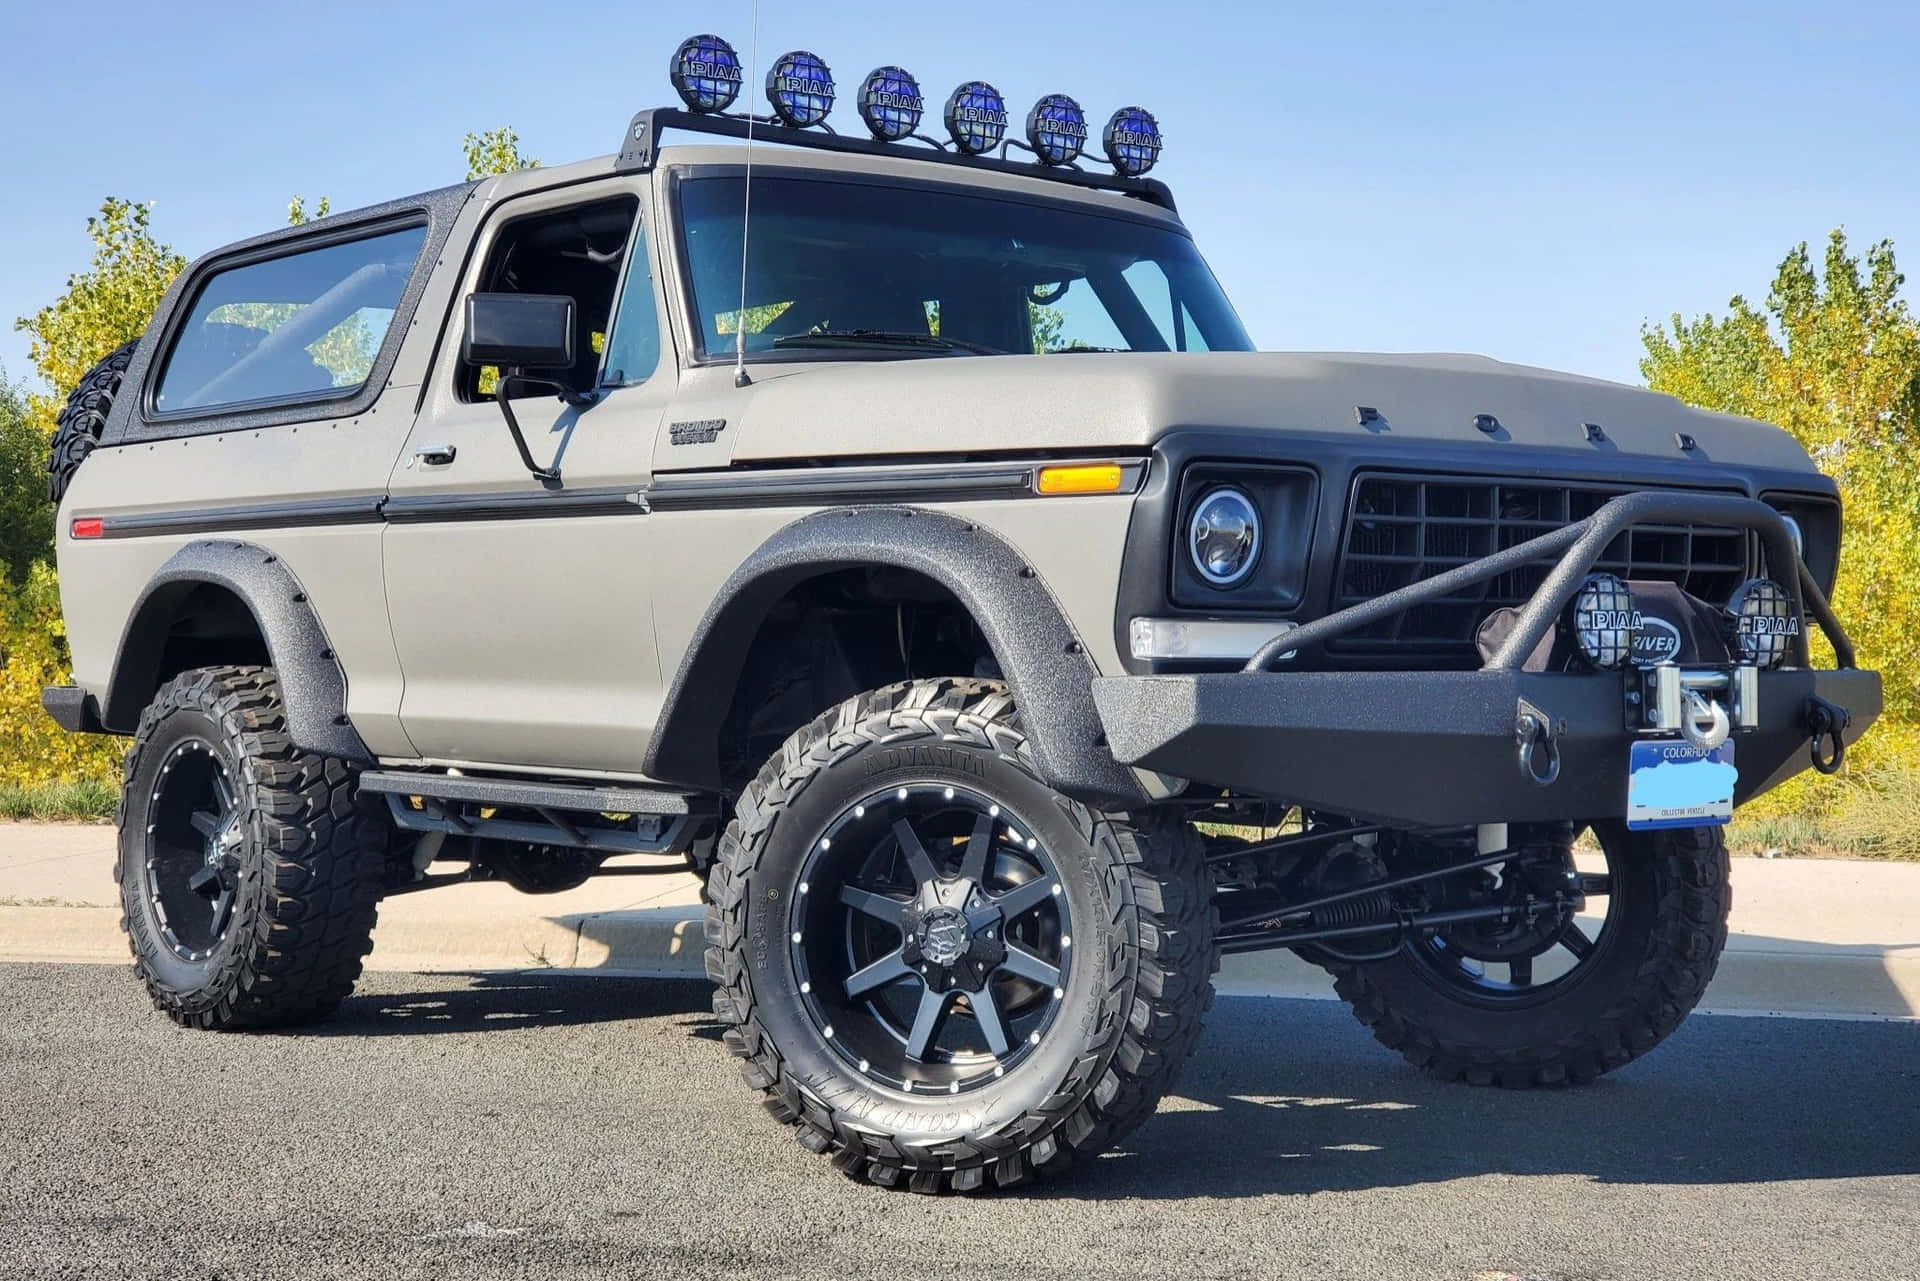 The All-New Ford Bronco Ready to Conquer Any Terrain